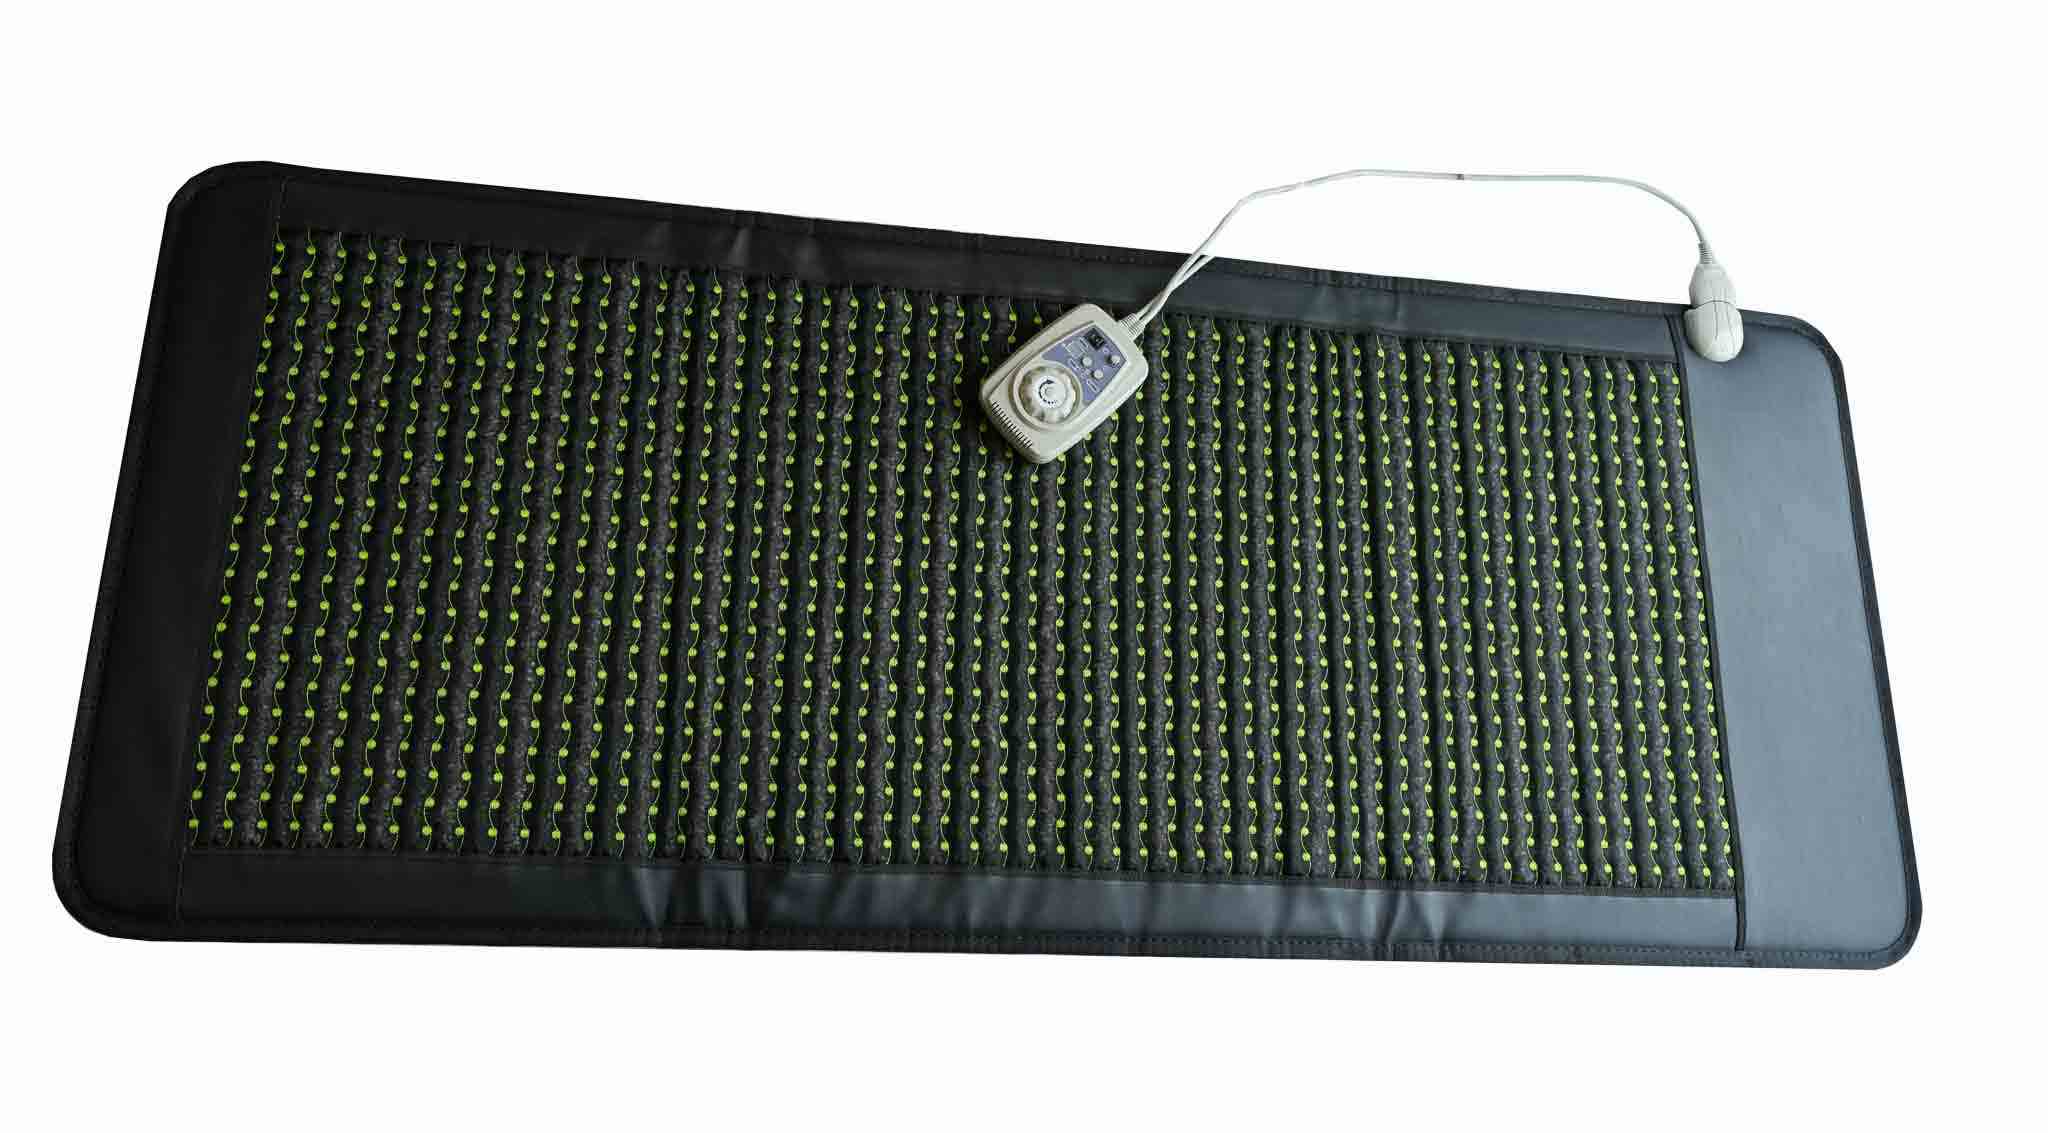 Premium Infrared Performance Mat for Enhanced Recovery and Relaxation With Negative ion